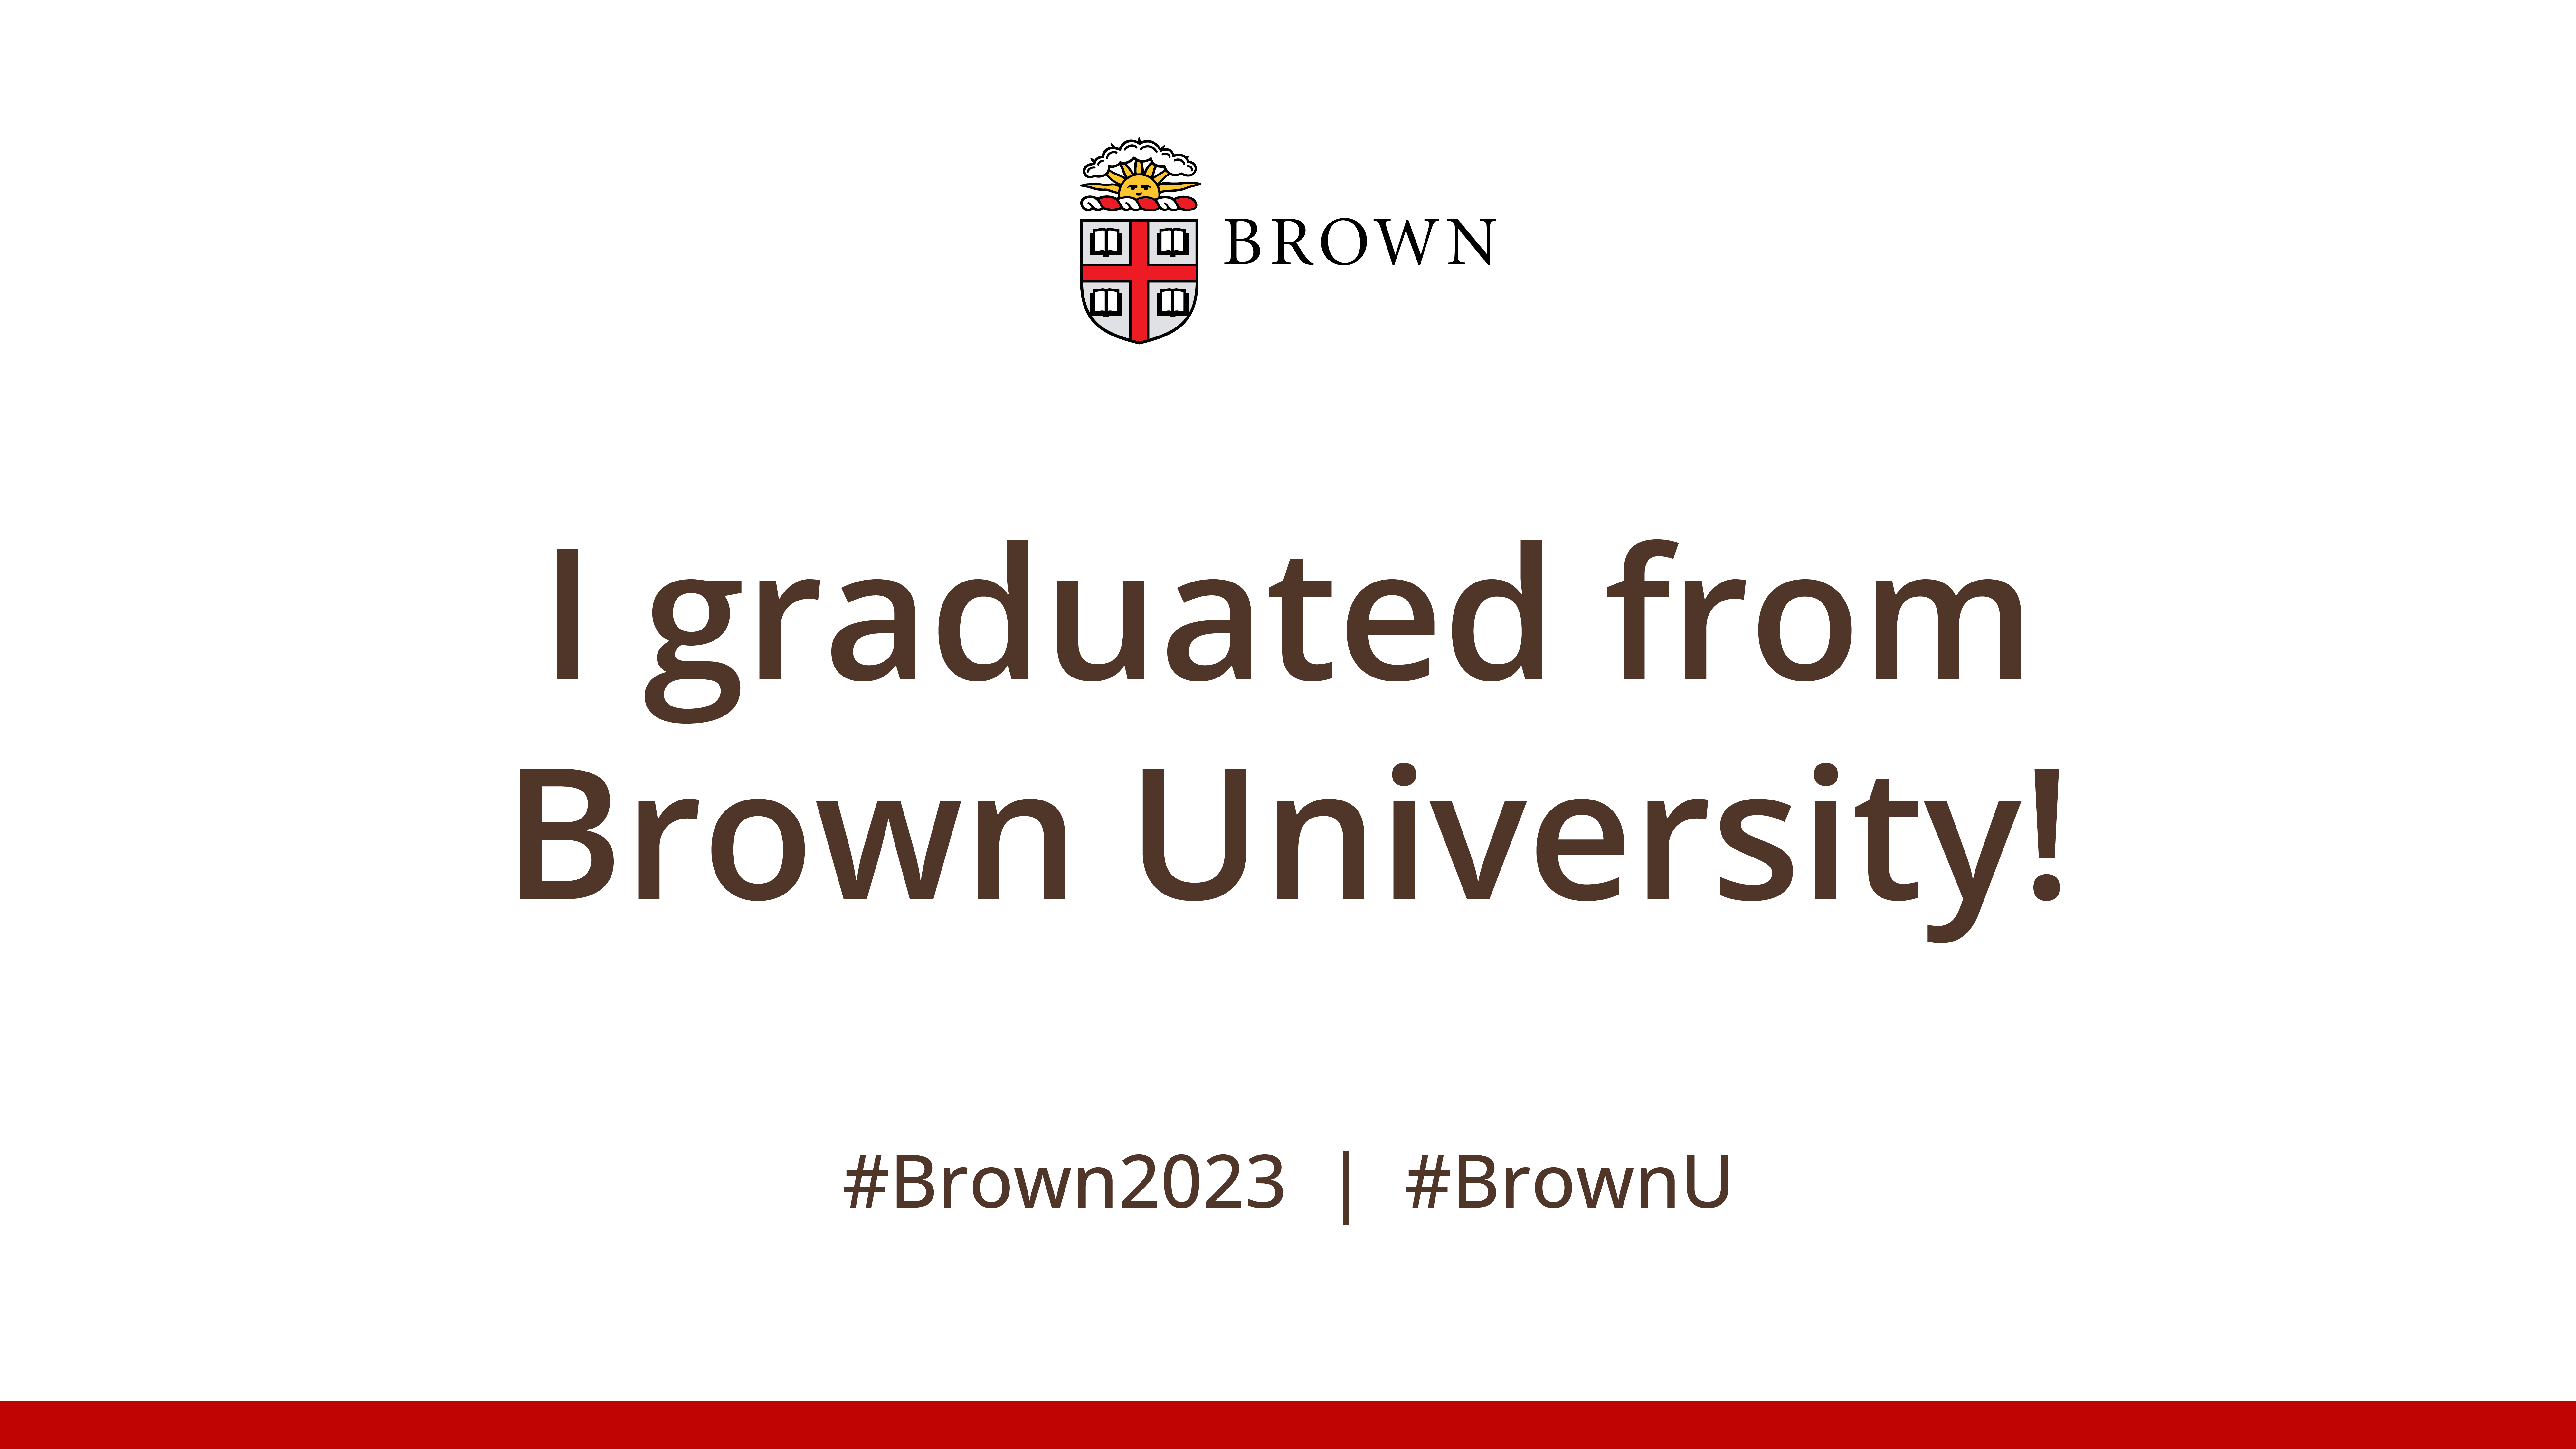 I graduated from Brown poster with white background